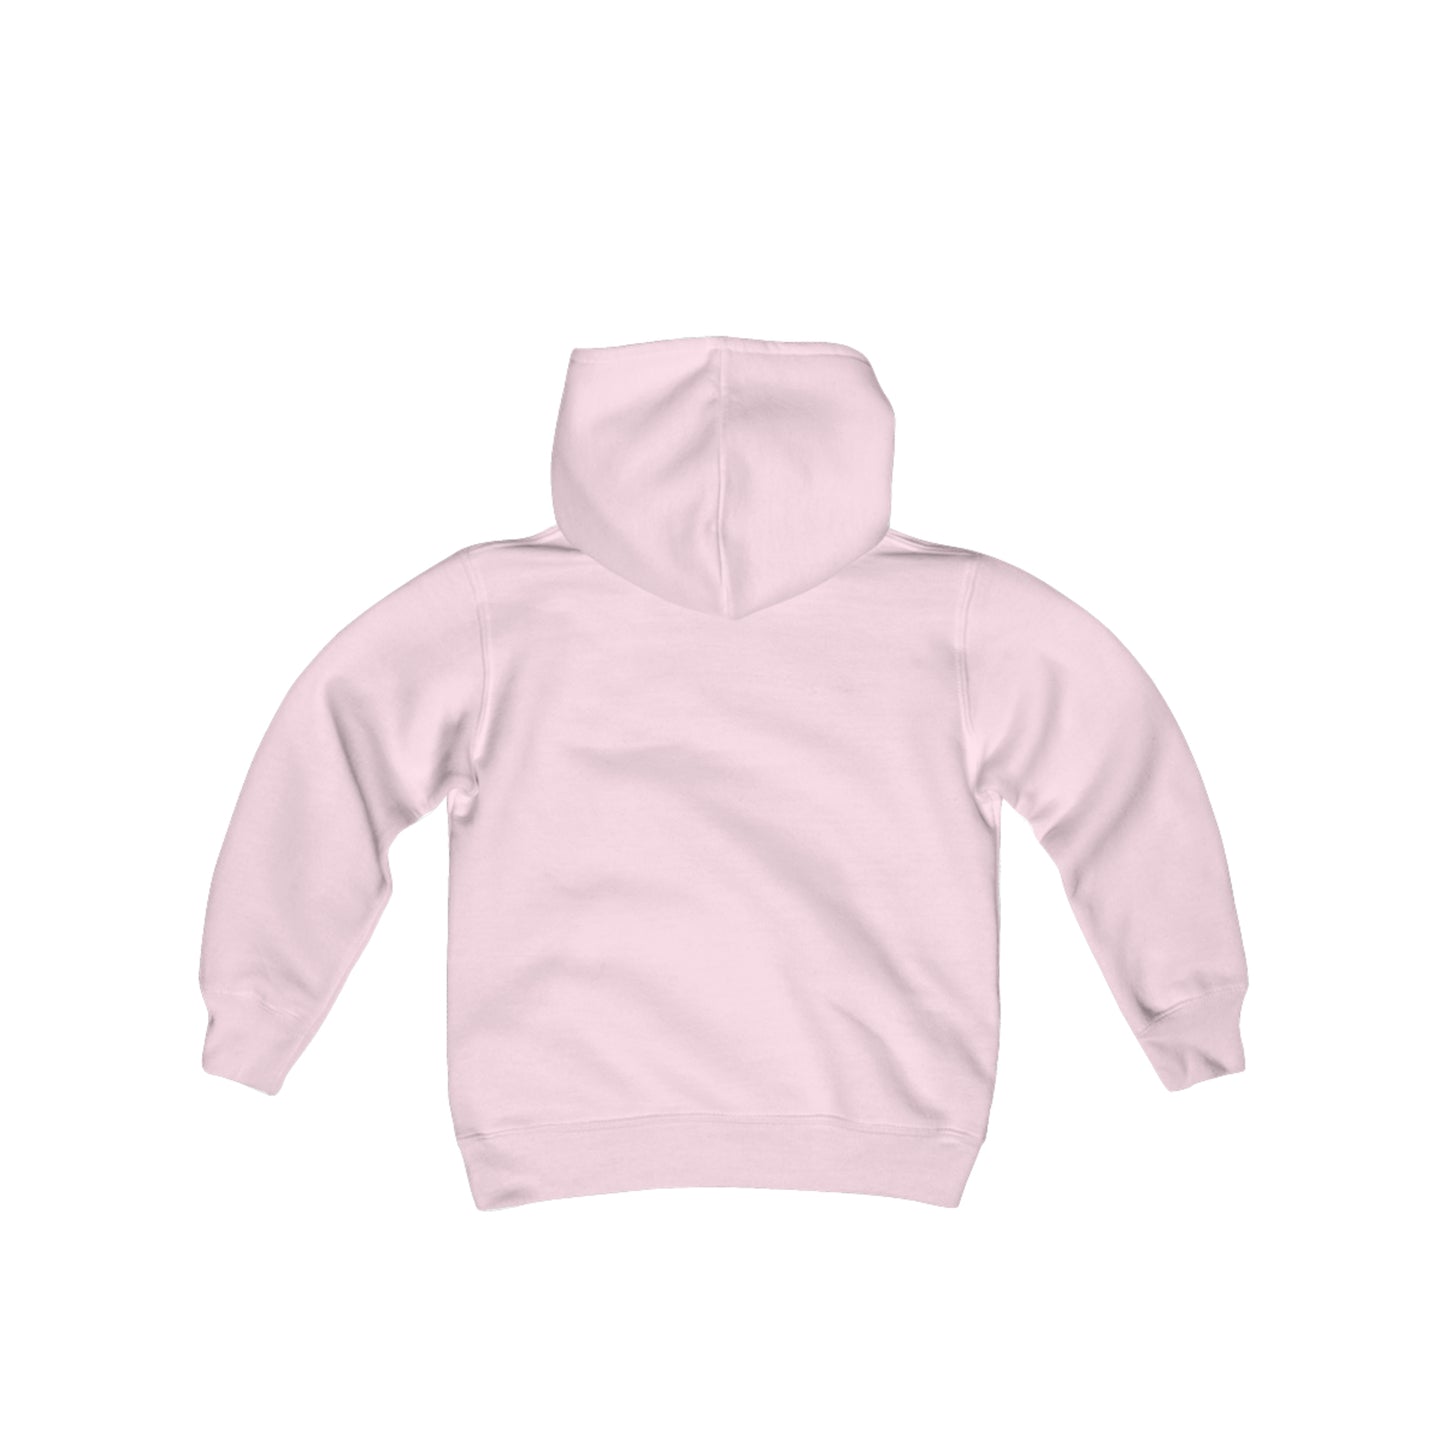 Youth Hooded Sweatshirt - Ballerina With Butterfly Wings